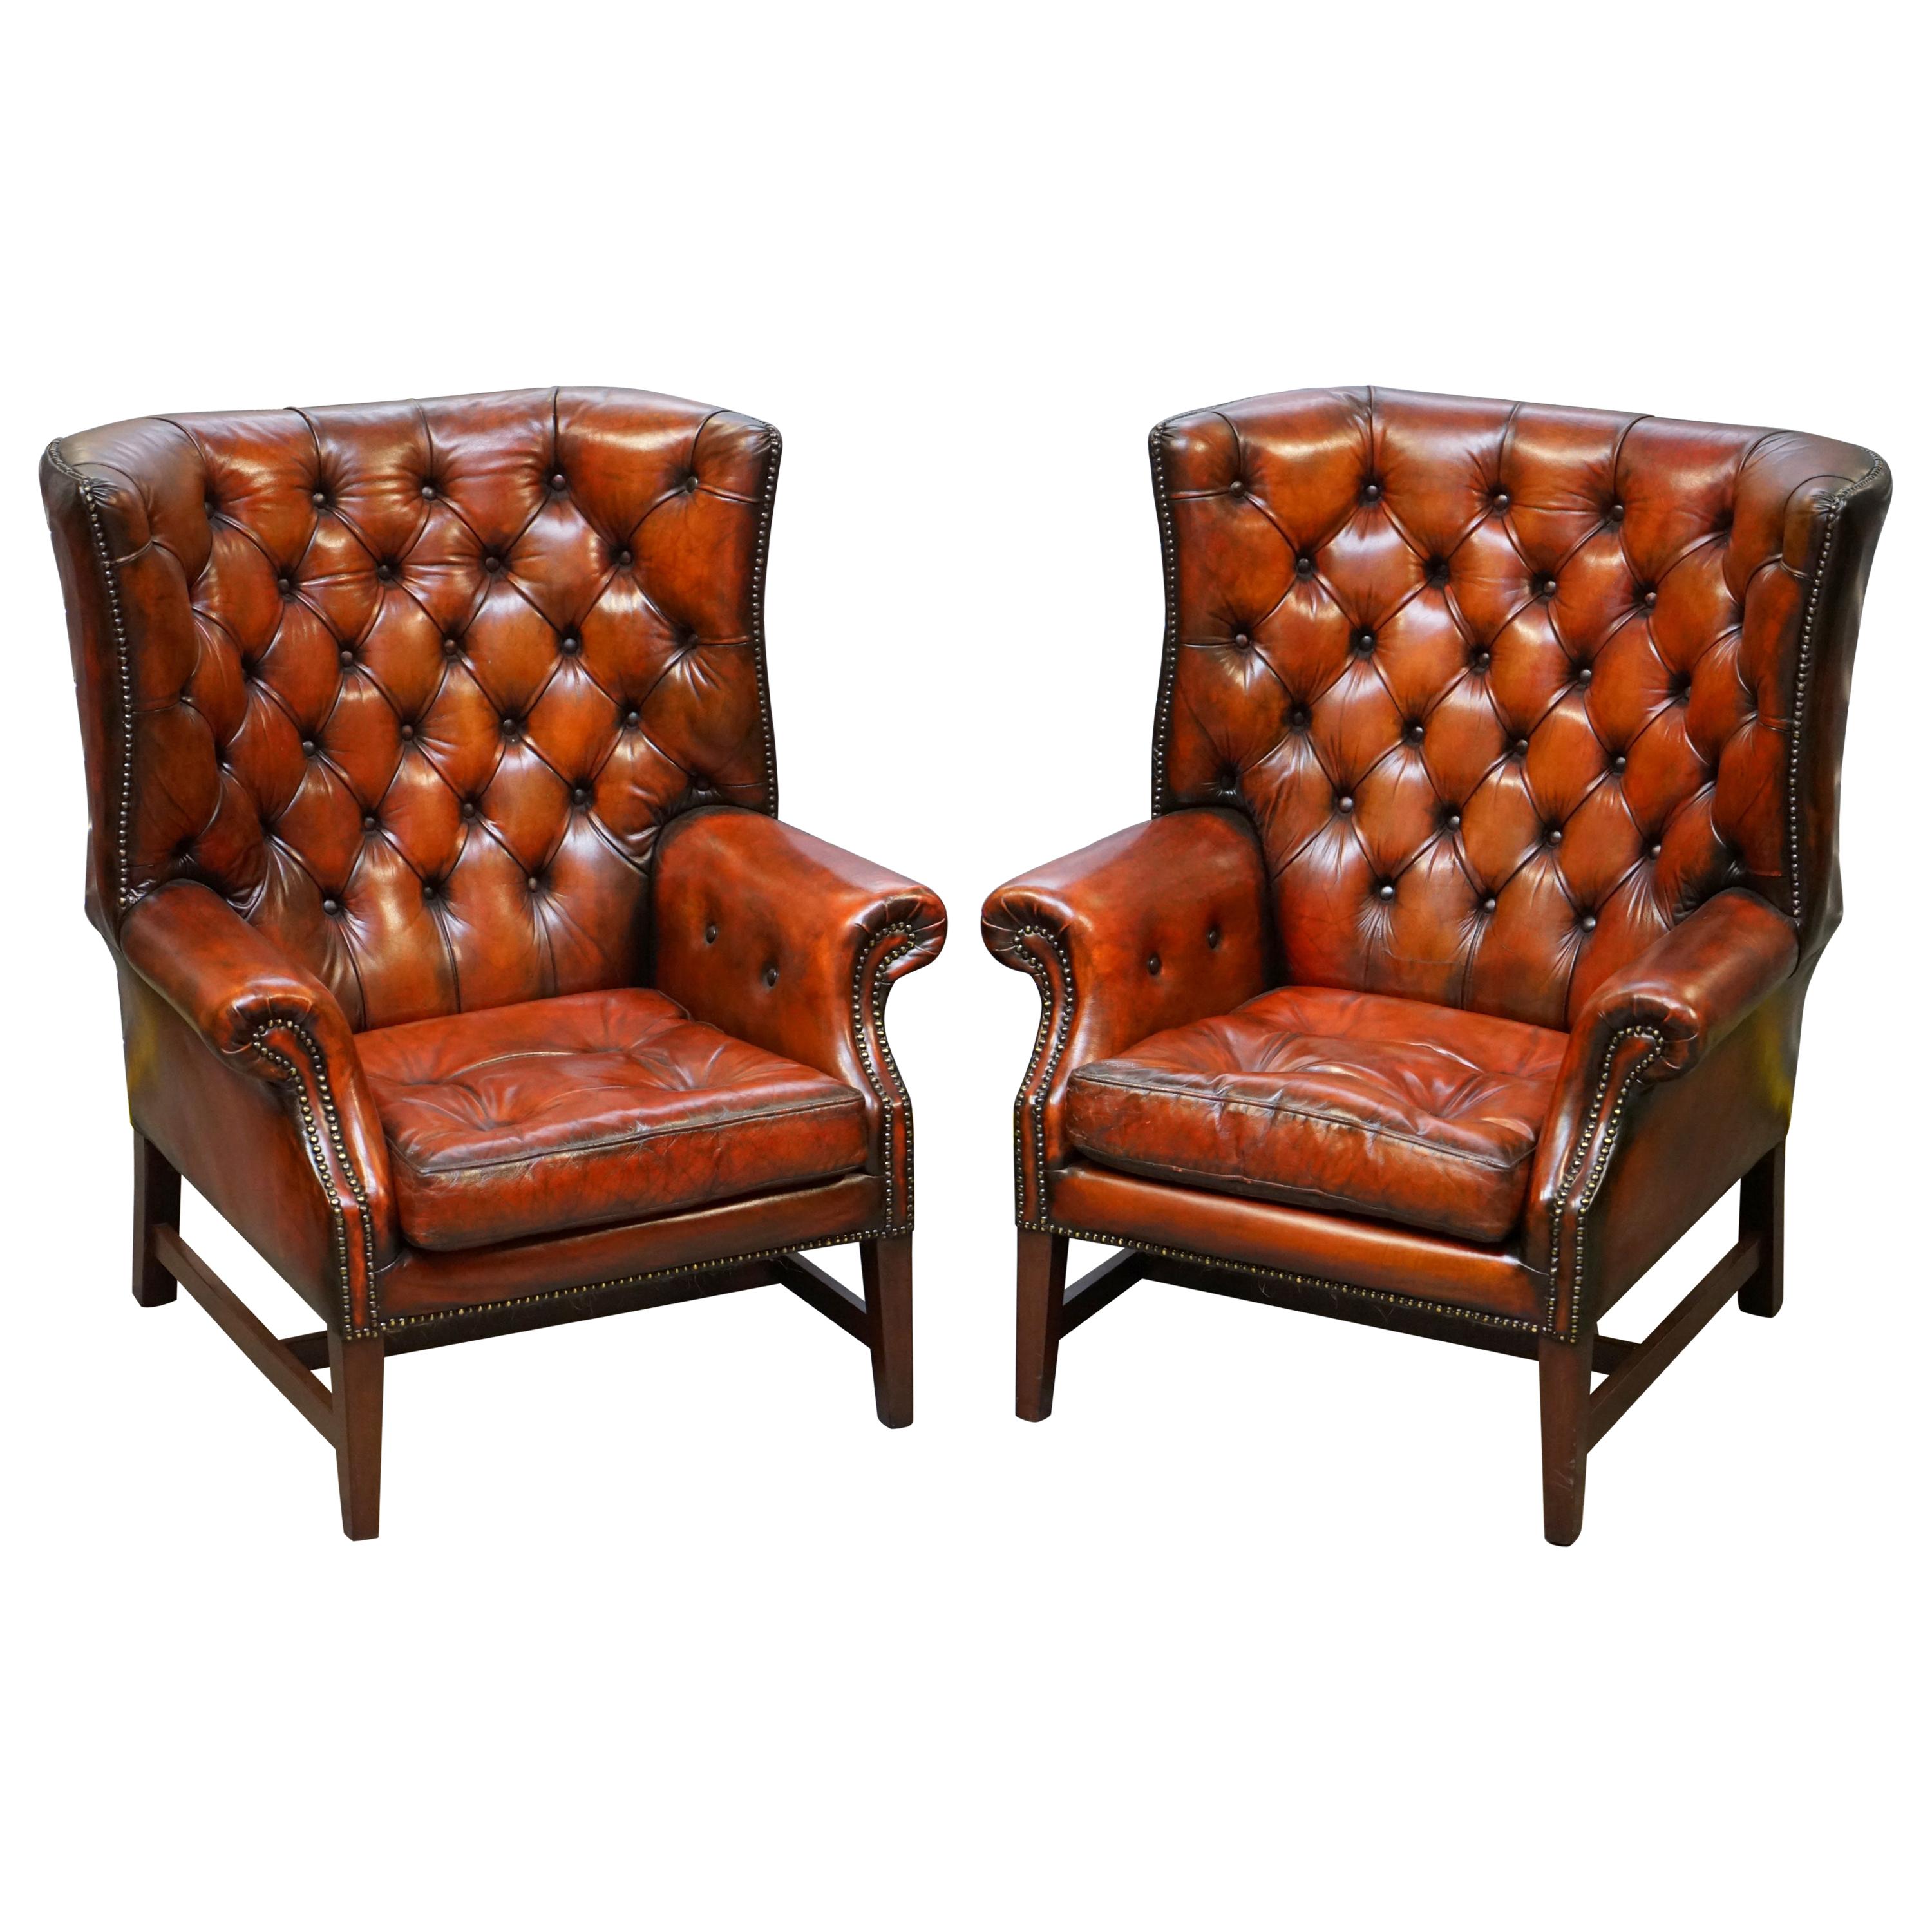 Pair of Restored Chesterfield Porters Wingback Armchairs Whisky Brown Leather